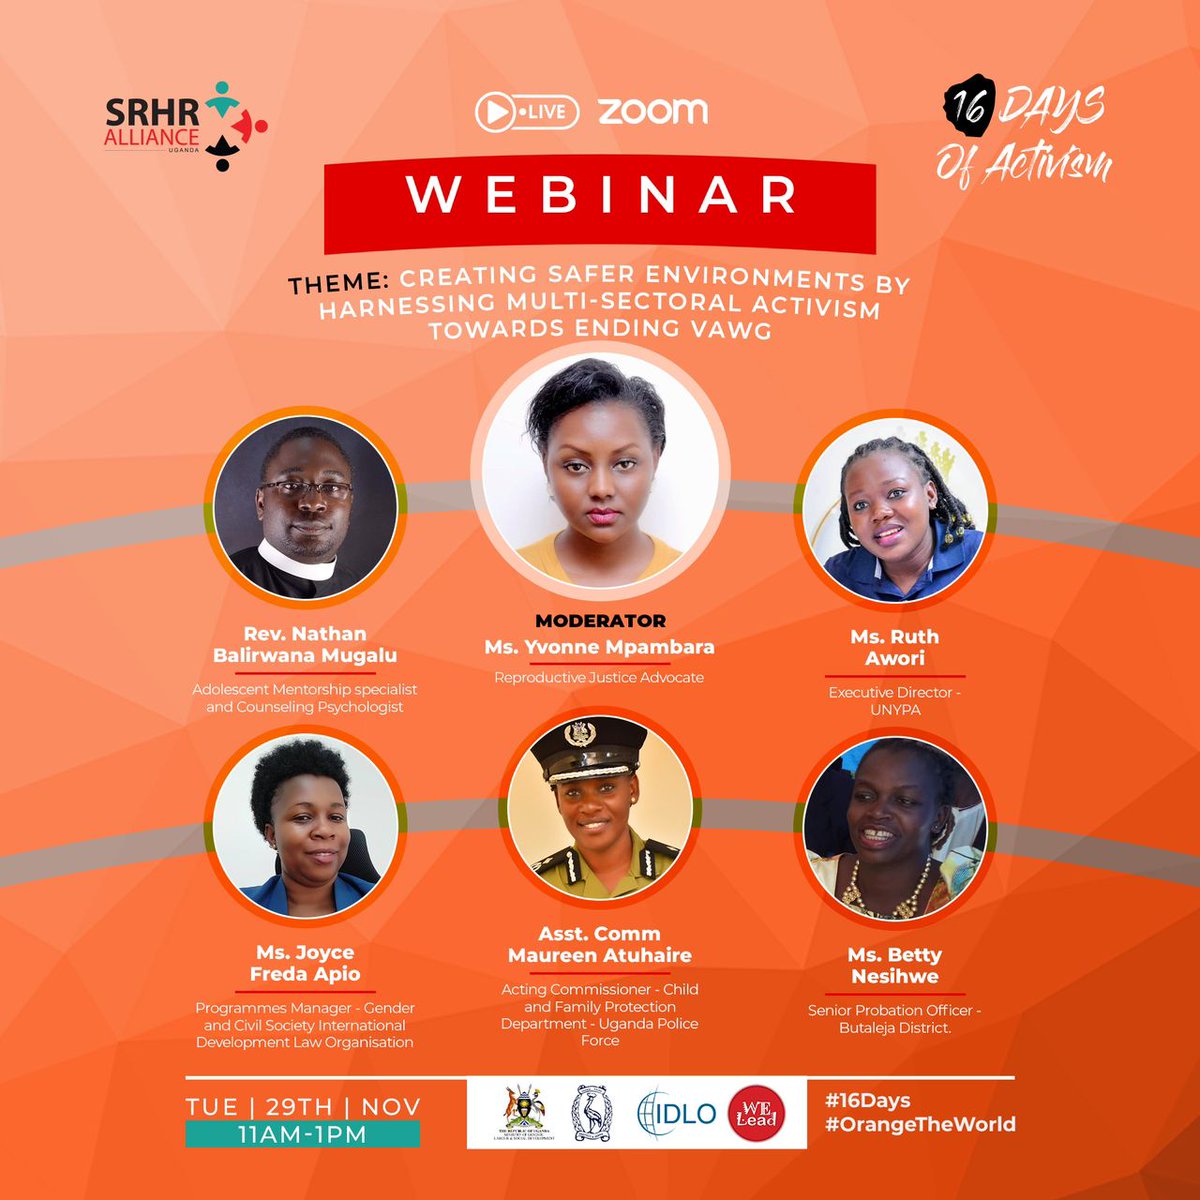 Join the discussion today as @SRHRAllianceUg hosts a webinar on creating safe environments for women and girls in commemoration of the #16DaysOfActivismAgainstGBV in a bid to end #ViolenceAgainstWomenandGirls at 11:00am.
@IDLO @Atuhairecarol10
@MugaluNathan